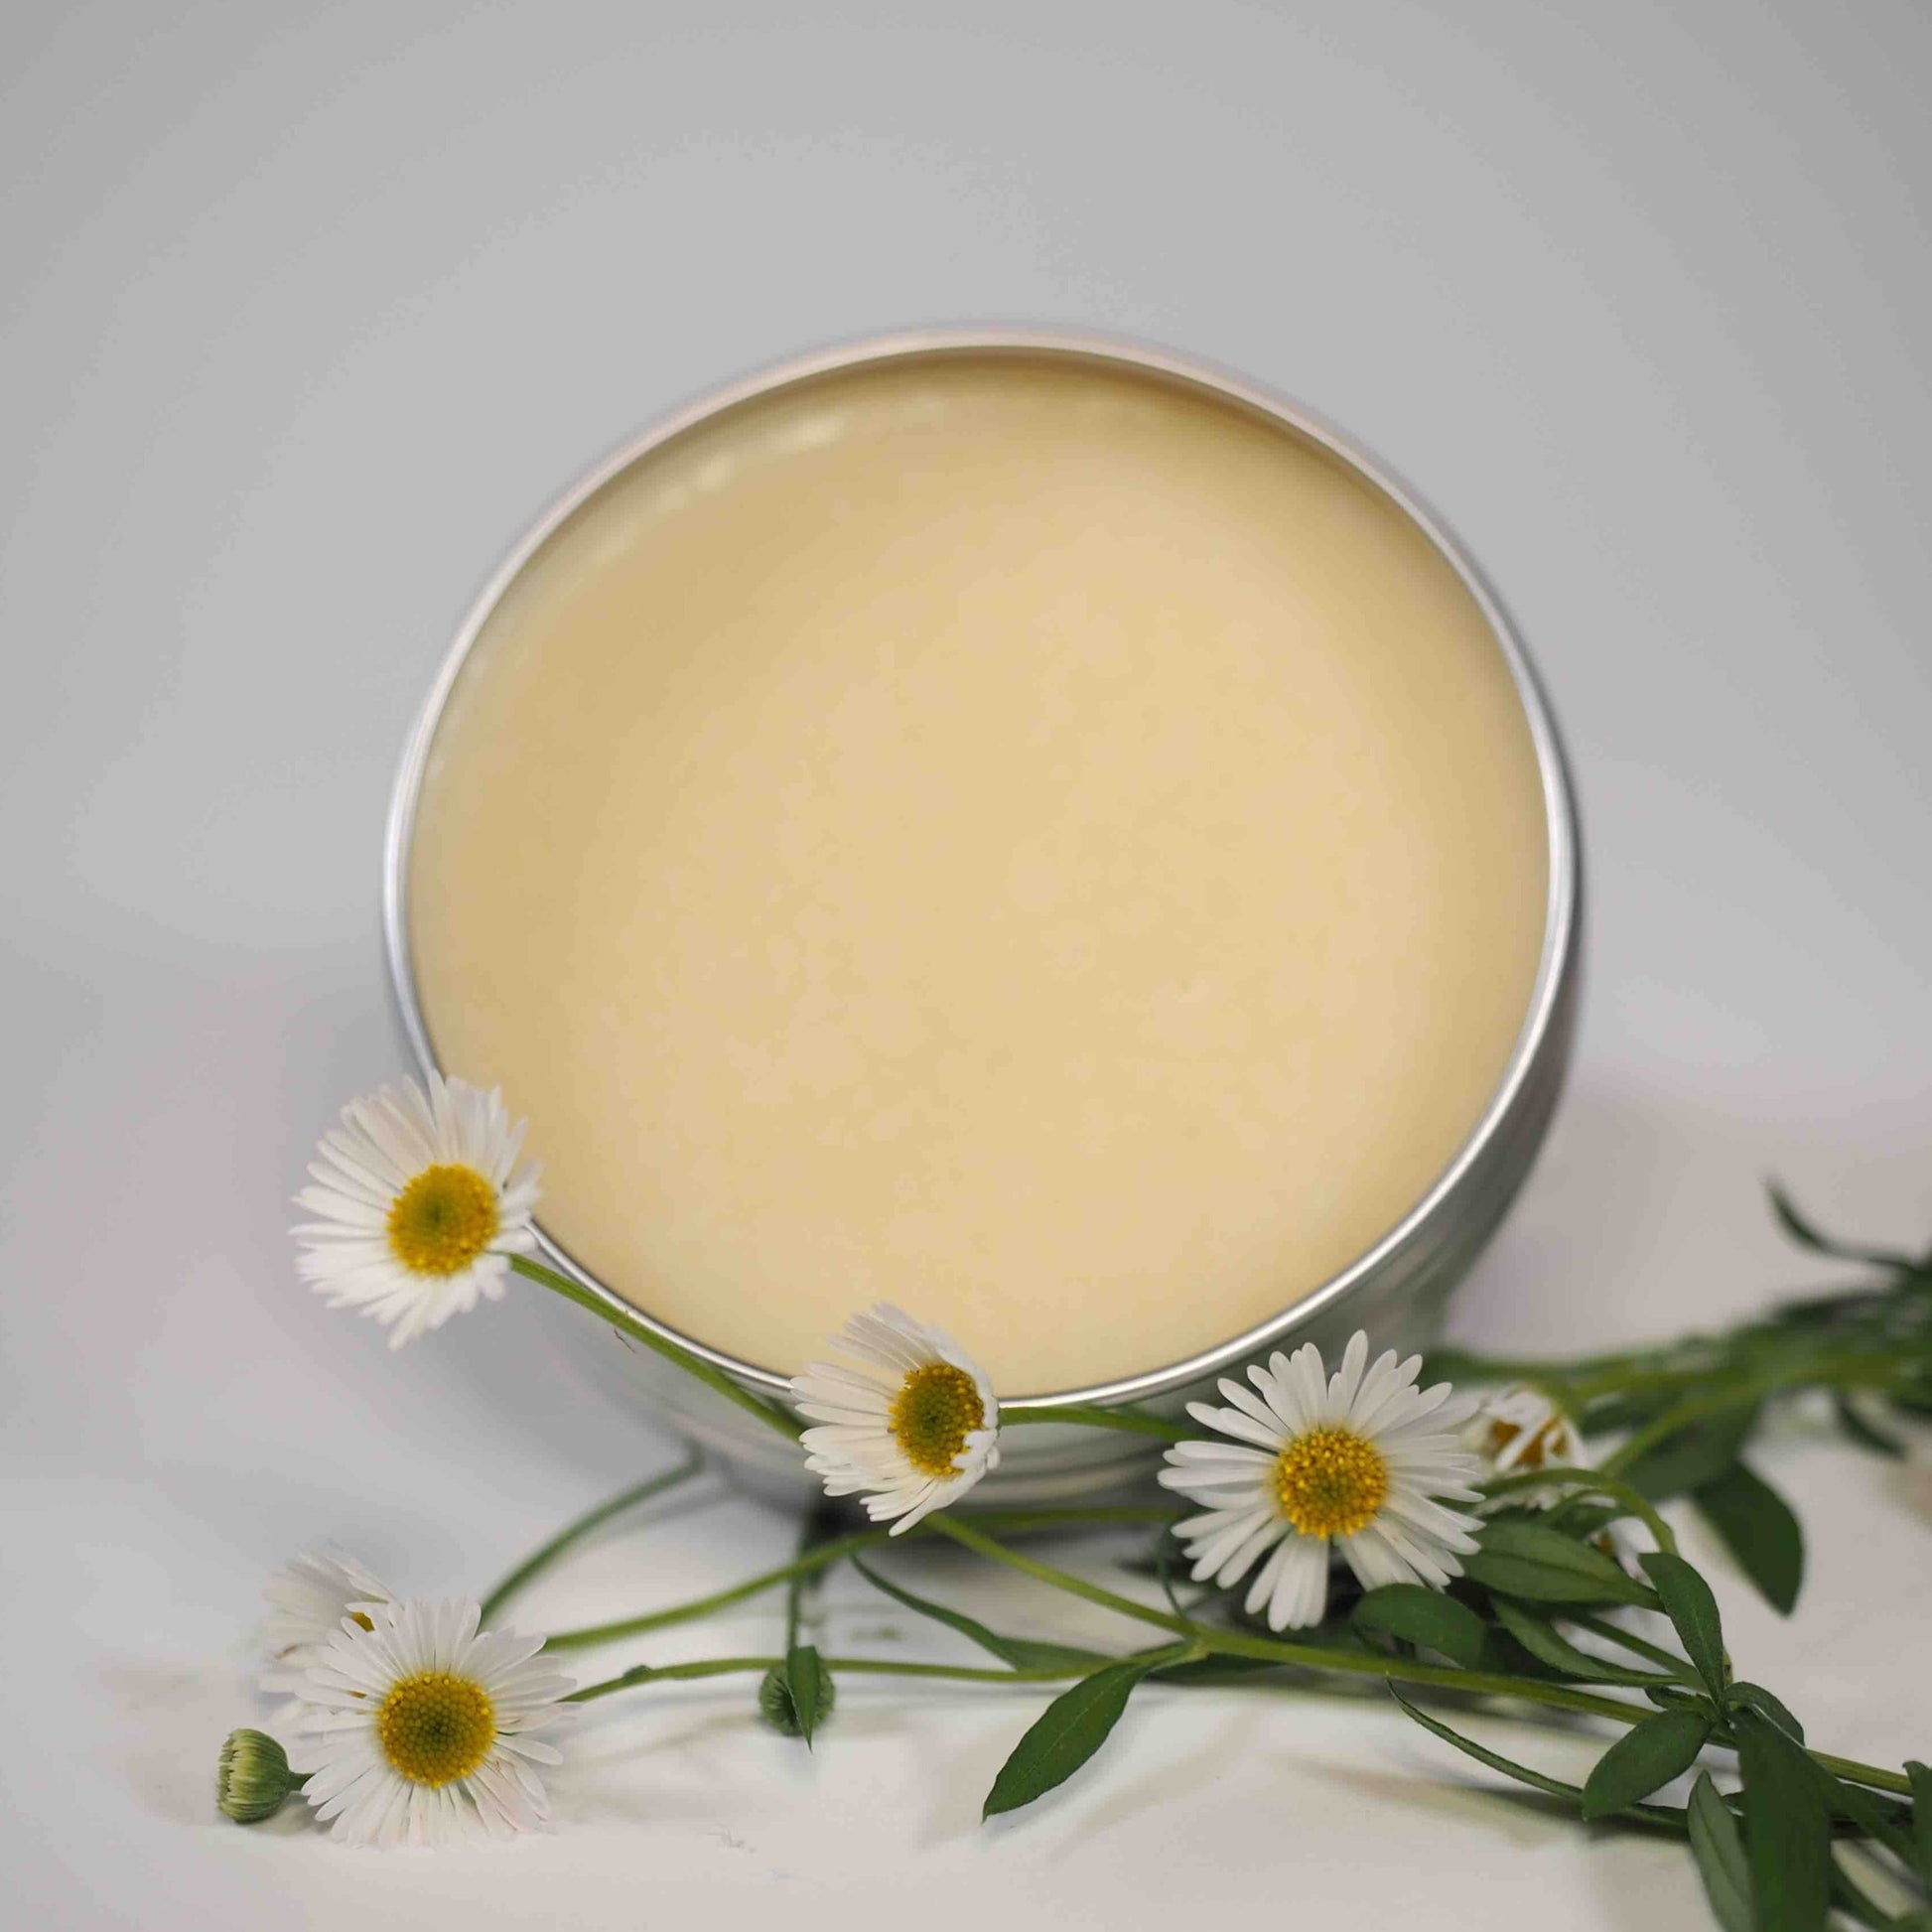 Buttery and smooth Organic Lavender Tattoo Balm shown in open tin with flower